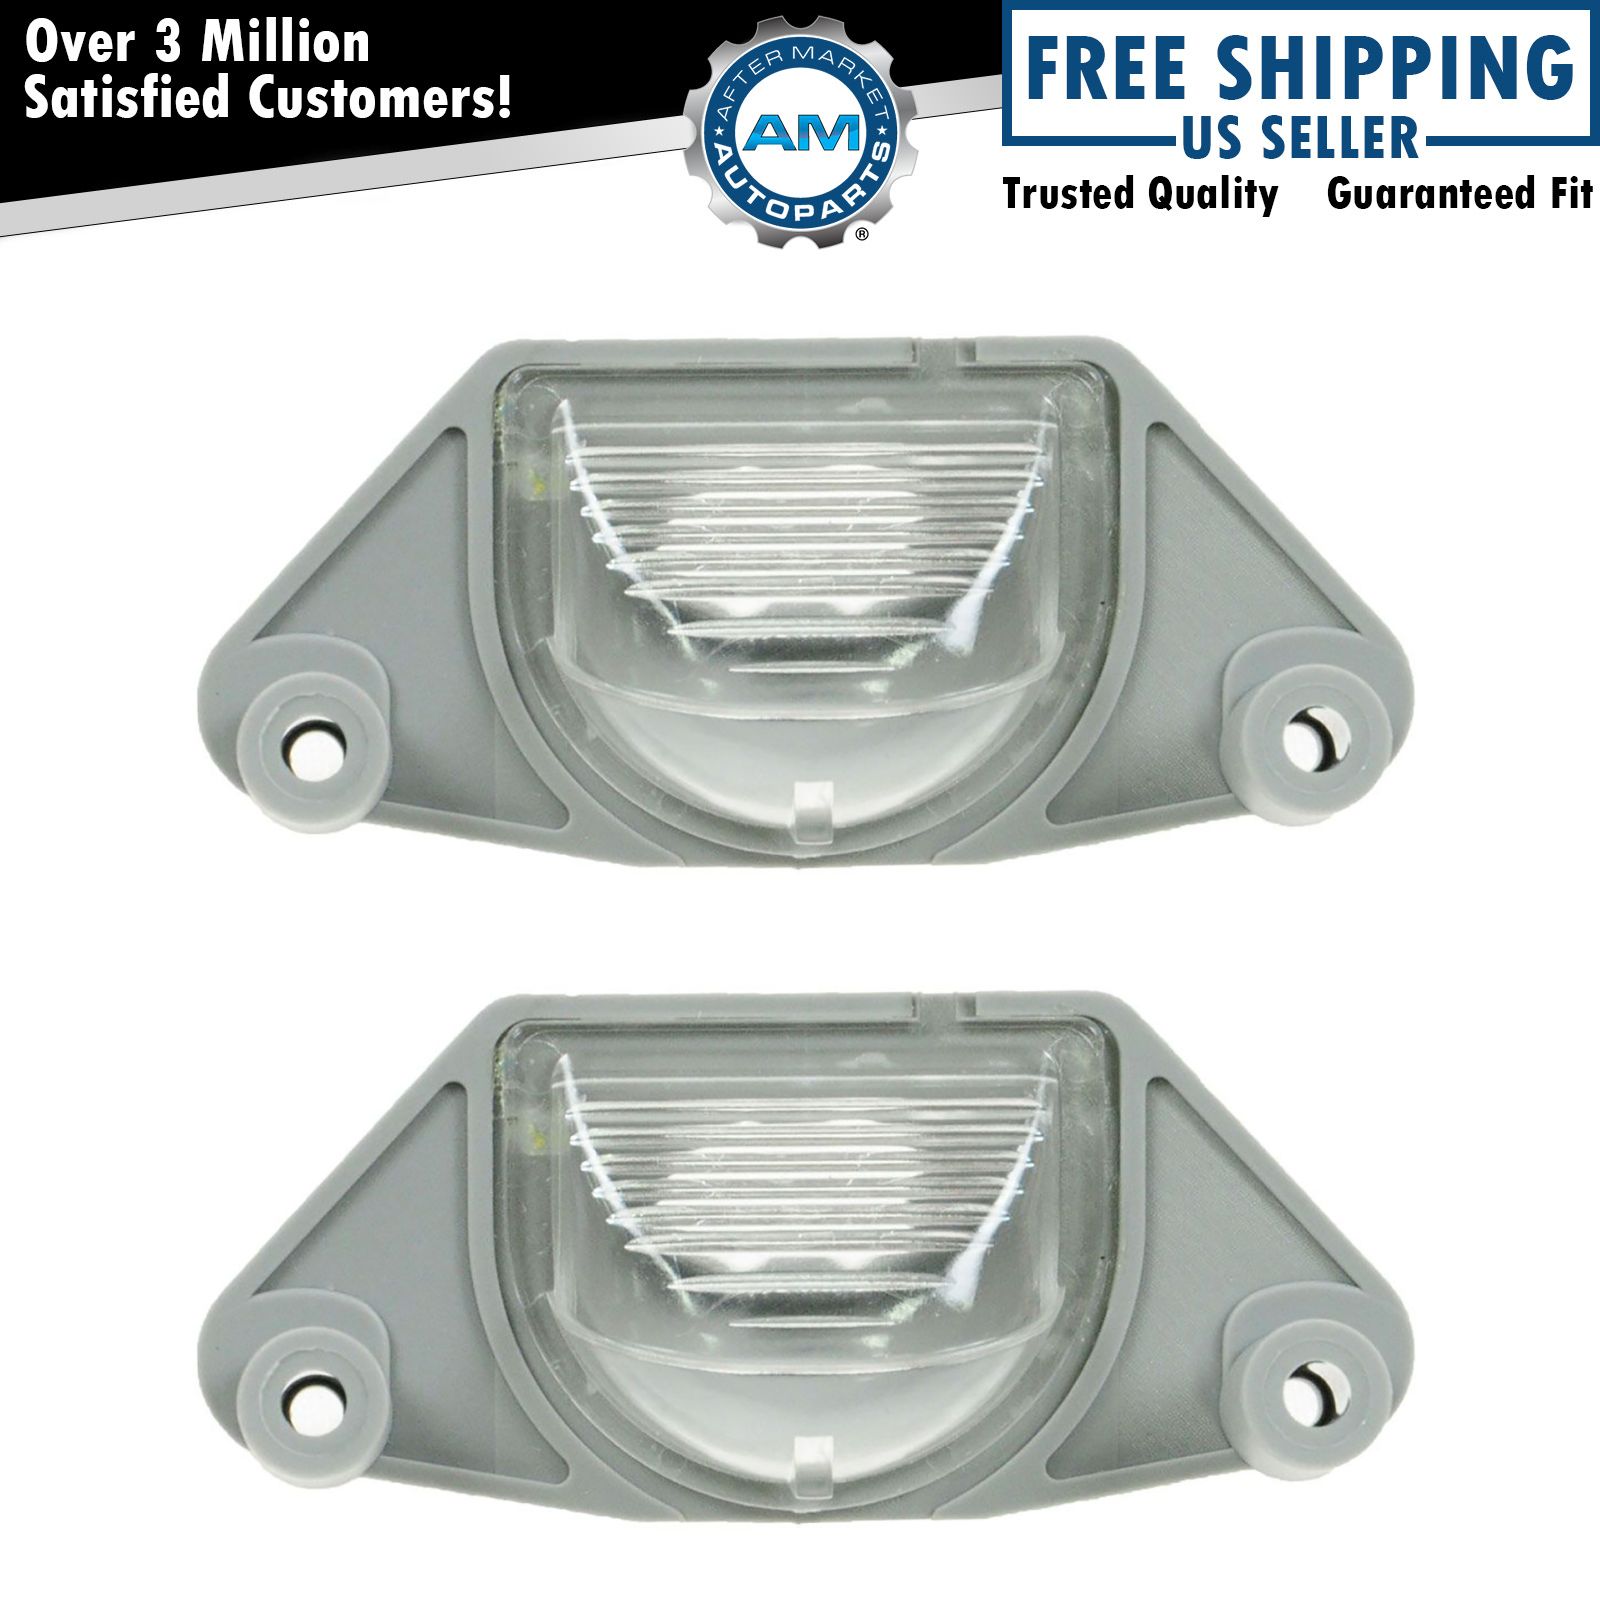 Dorman License Plate Light Lamp Pair Set of 2 for Buick Chevy GMC Olds Pontiac